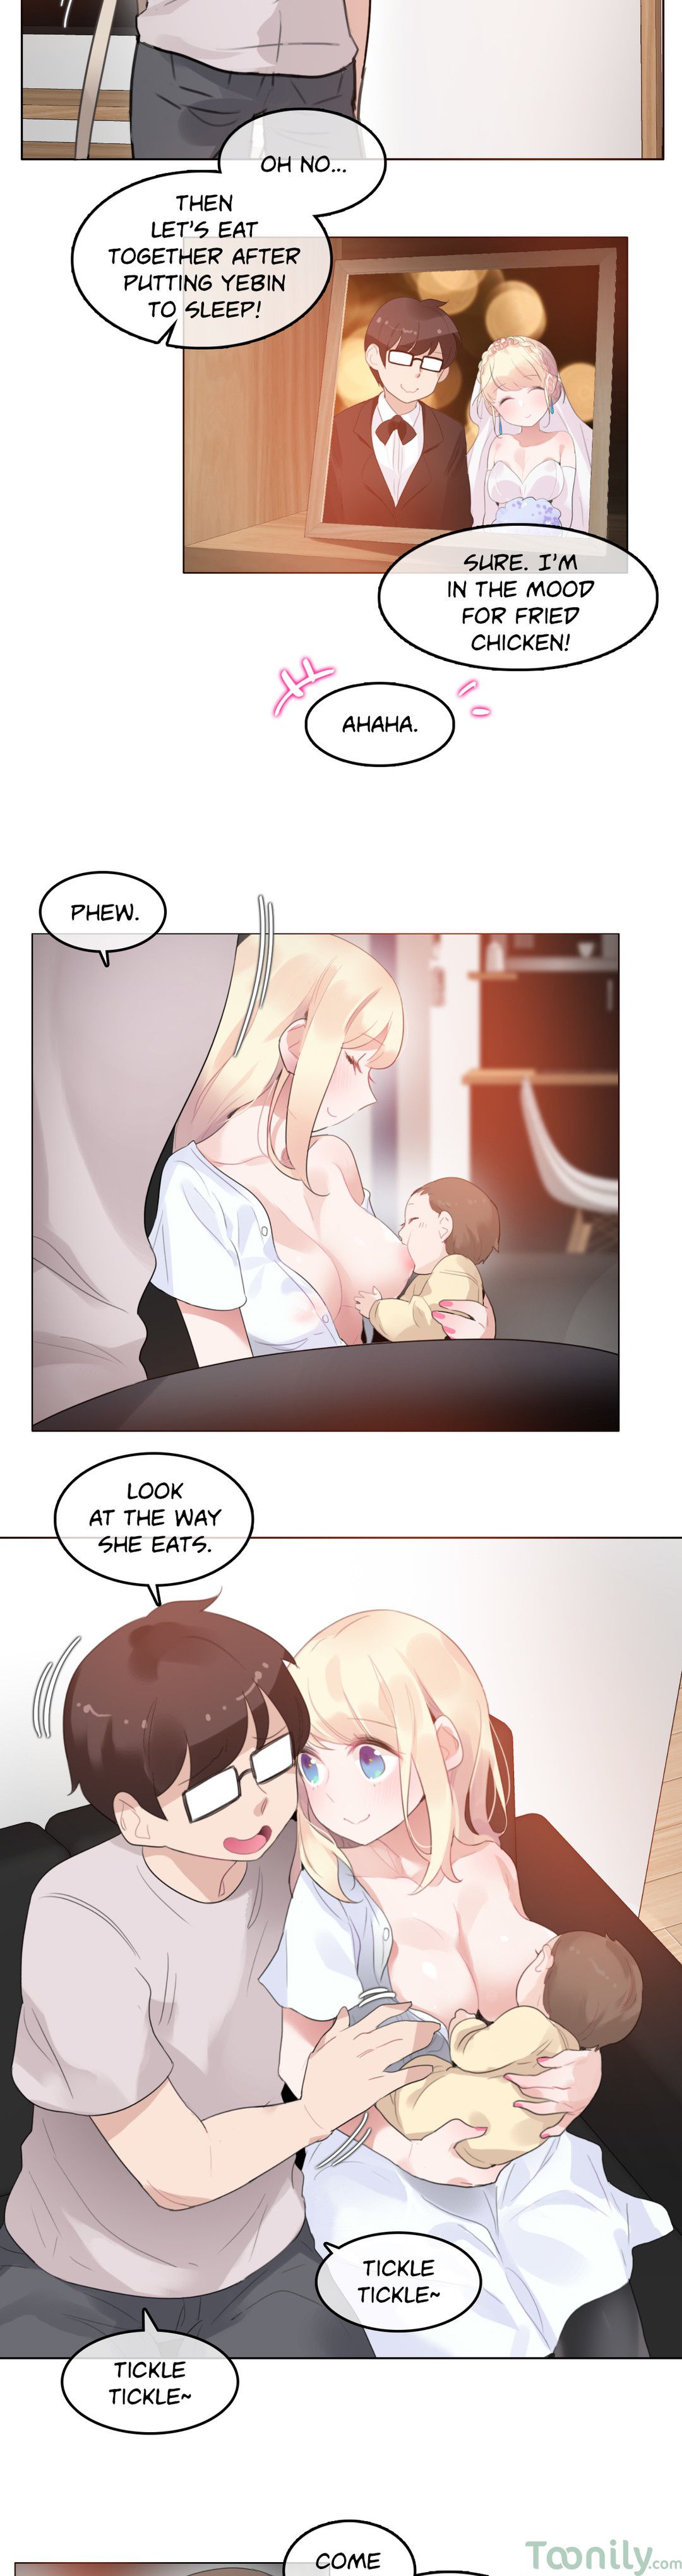 A Pervert's Daily Life - 59 page 3